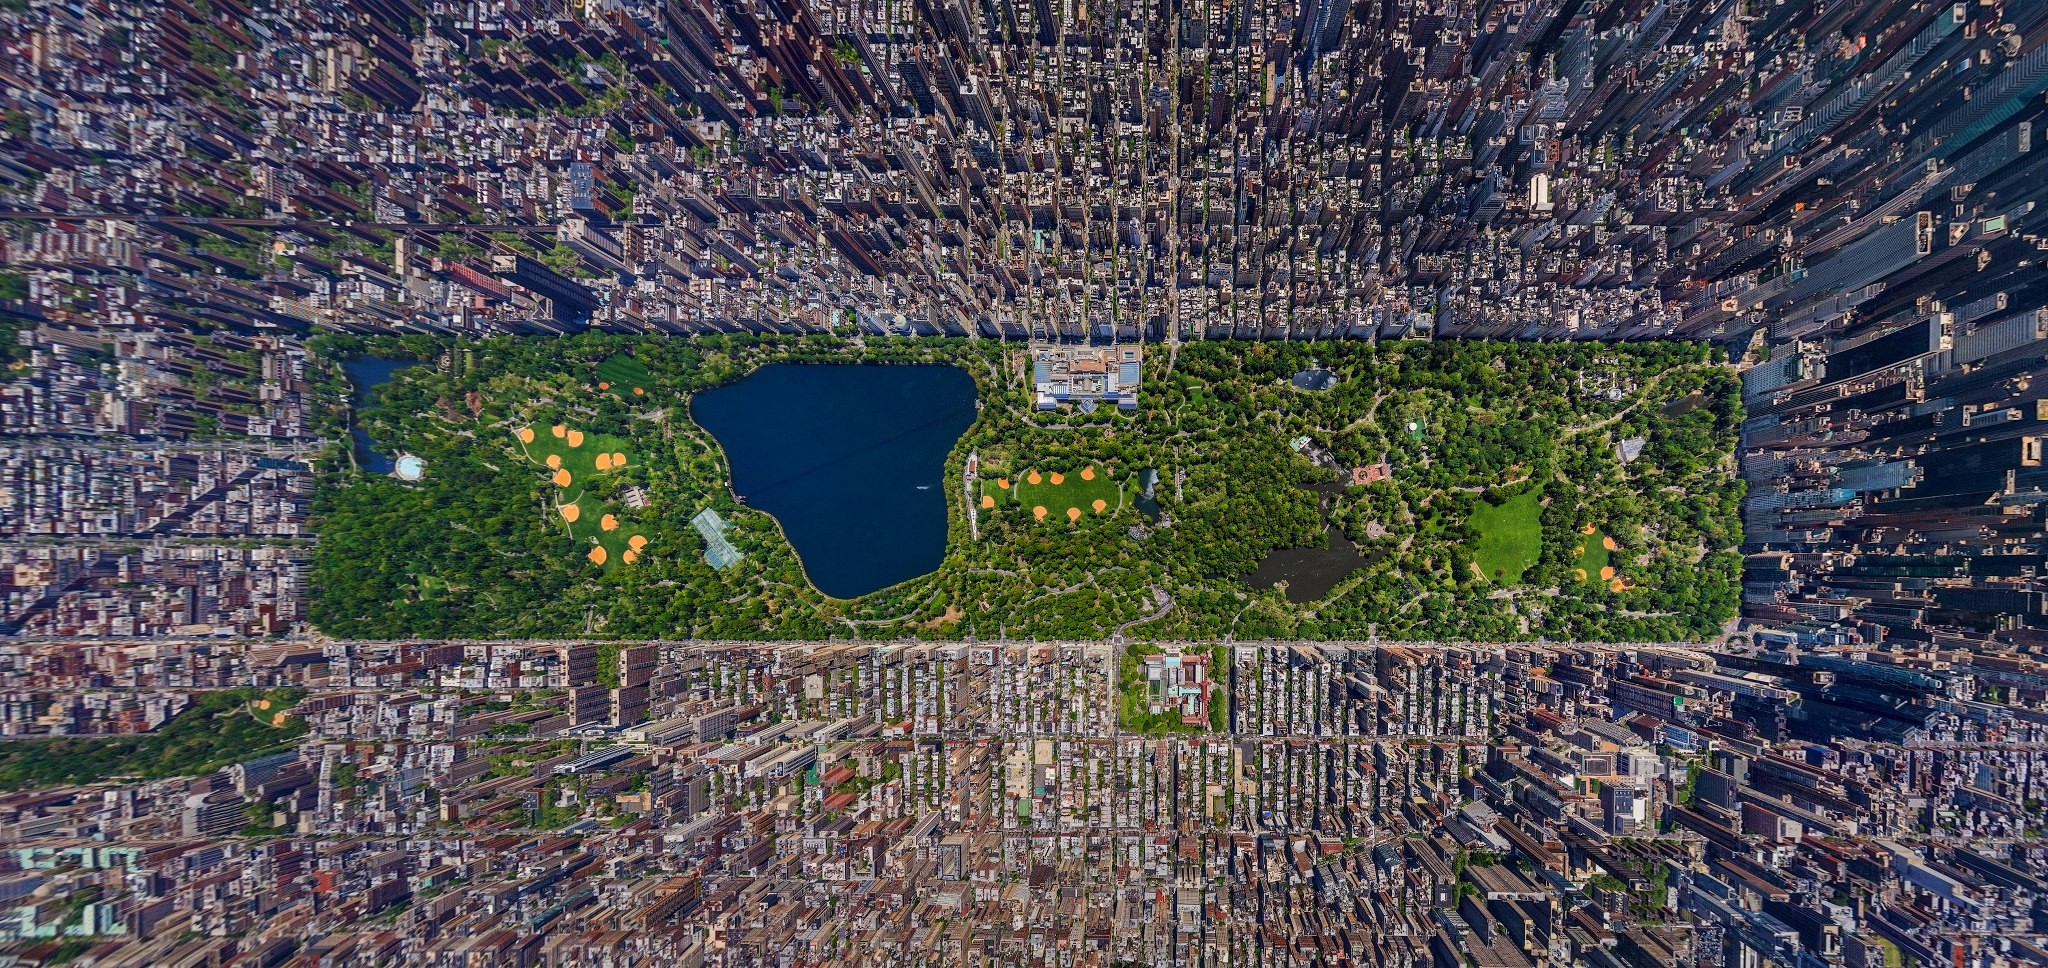 New York City, Central Park, Town, River Wallpaper